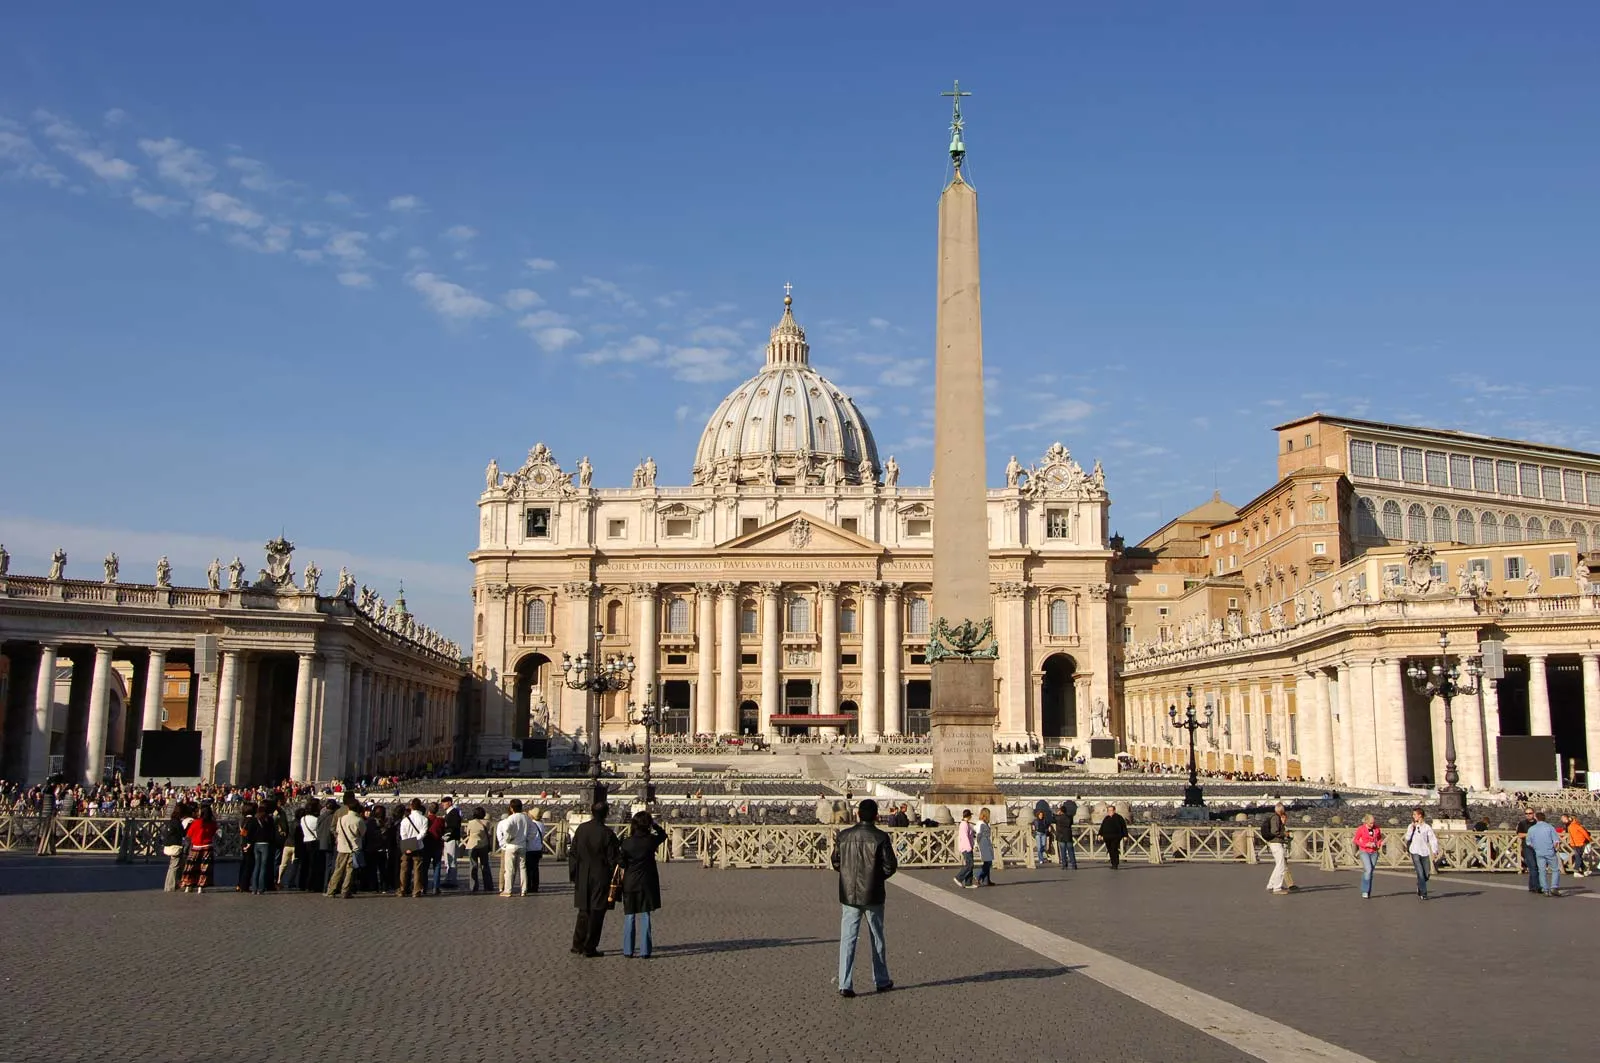 How Big Is The St. Peter's Basilica